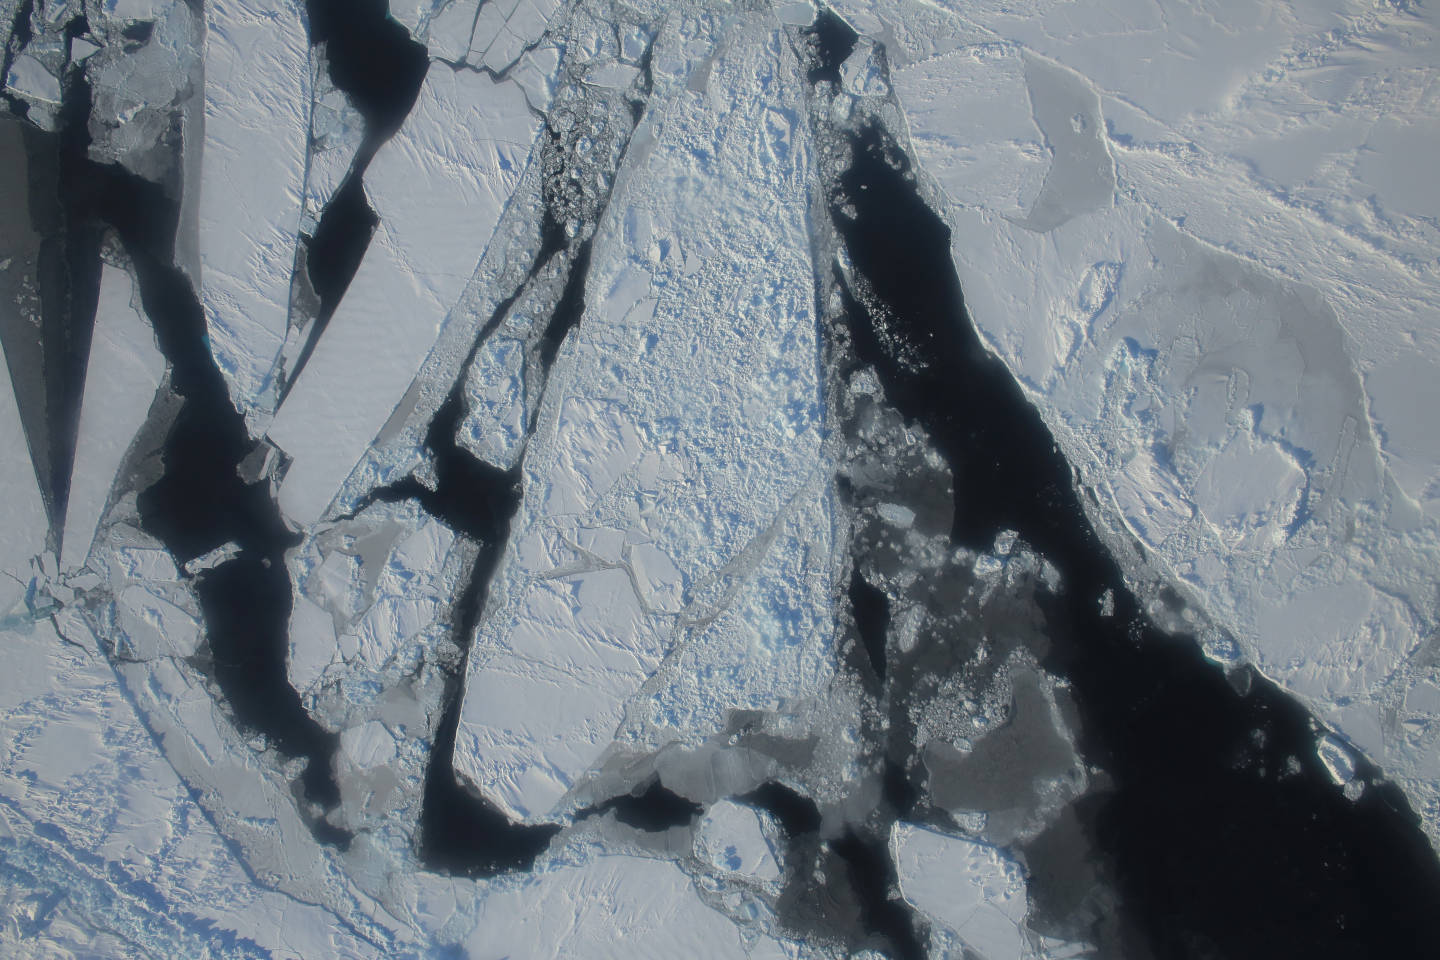 This photograph from a March 27, 2015 NASA IceBridge flight shows a mixture of deformed, snow-covered, first-year sea ice floes, interspersed by open-water leads, brash ice and thin, snow-free nilas and young sea ice over the East Beaufort Sea. Nilas are thin sheets of smooth, level ice less than 10 centimeters (4 inches) thick and appear darkest when thin.  NASA/Operation Ice Bridge.